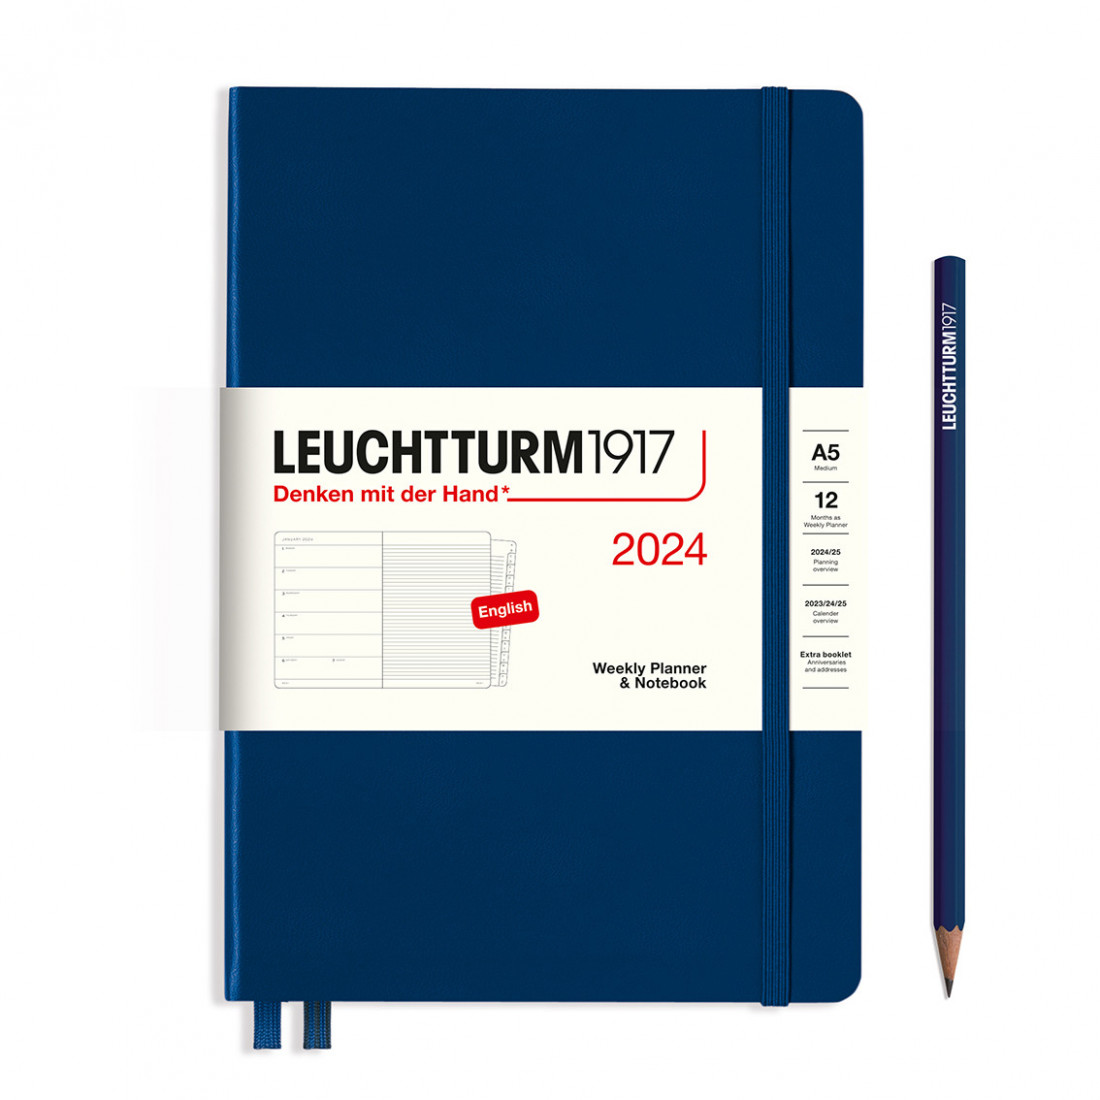 Leuchtturm 1917 Weekly Planner and Notebook 2024 Navy Medium A5 Hard Cover